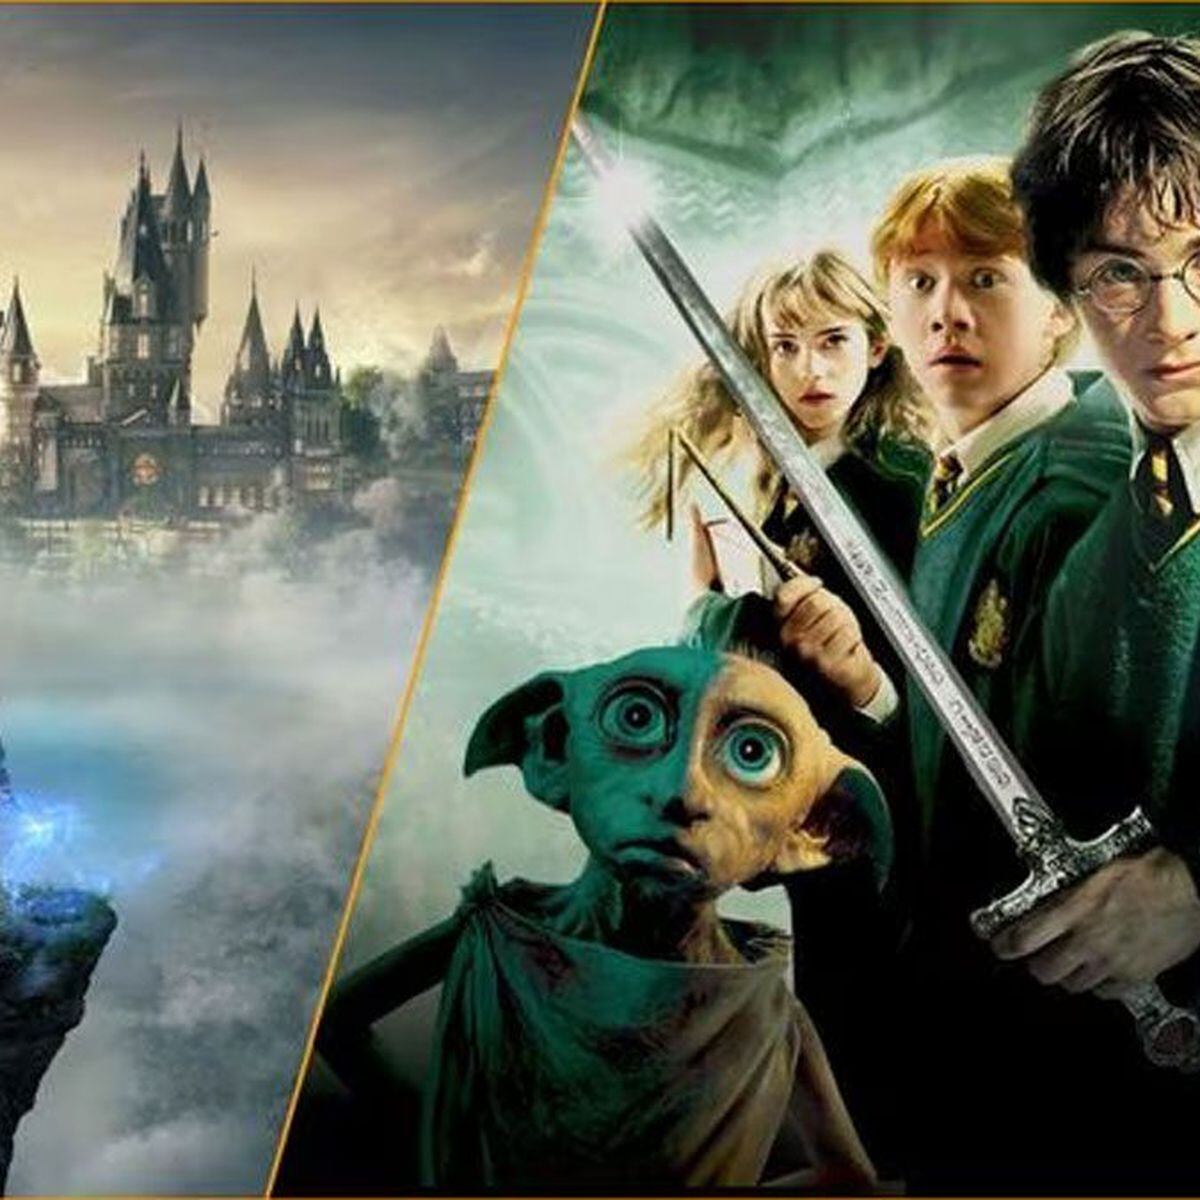 Harry Potter TV Series Based on Books Nearing Deal at HBO Max (Report)